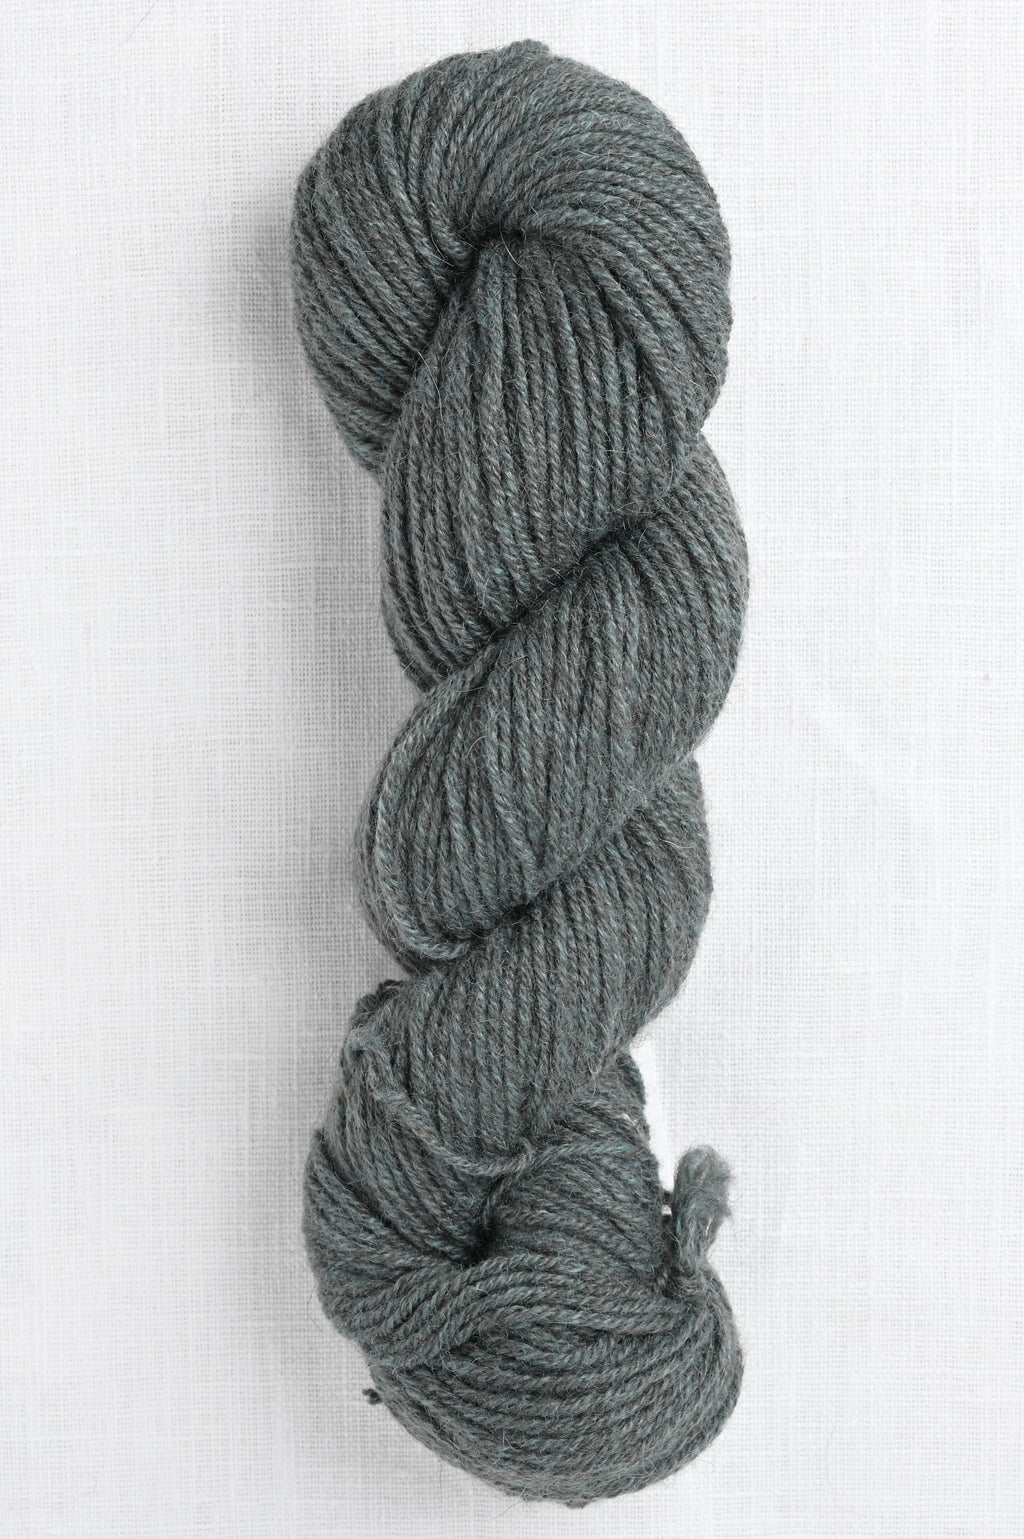 Yak yarn - A knitting guide to the luxuriously soft wool form Central Asia